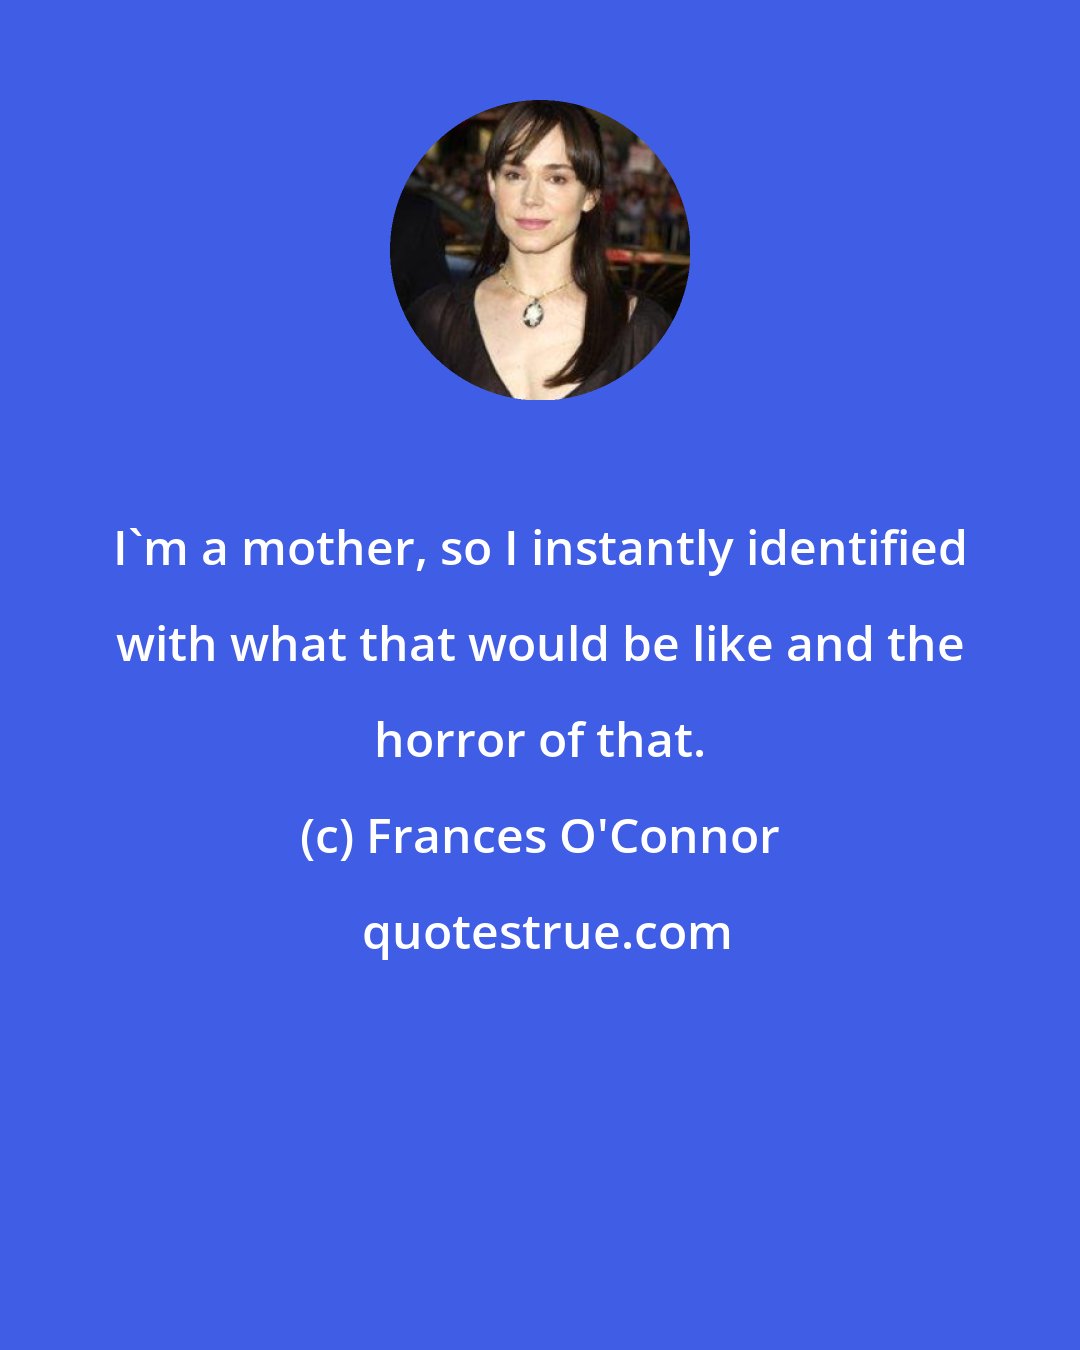 Frances O'Connor: I'm a mother, so I instantly identified with what that would be like and the horror of that.